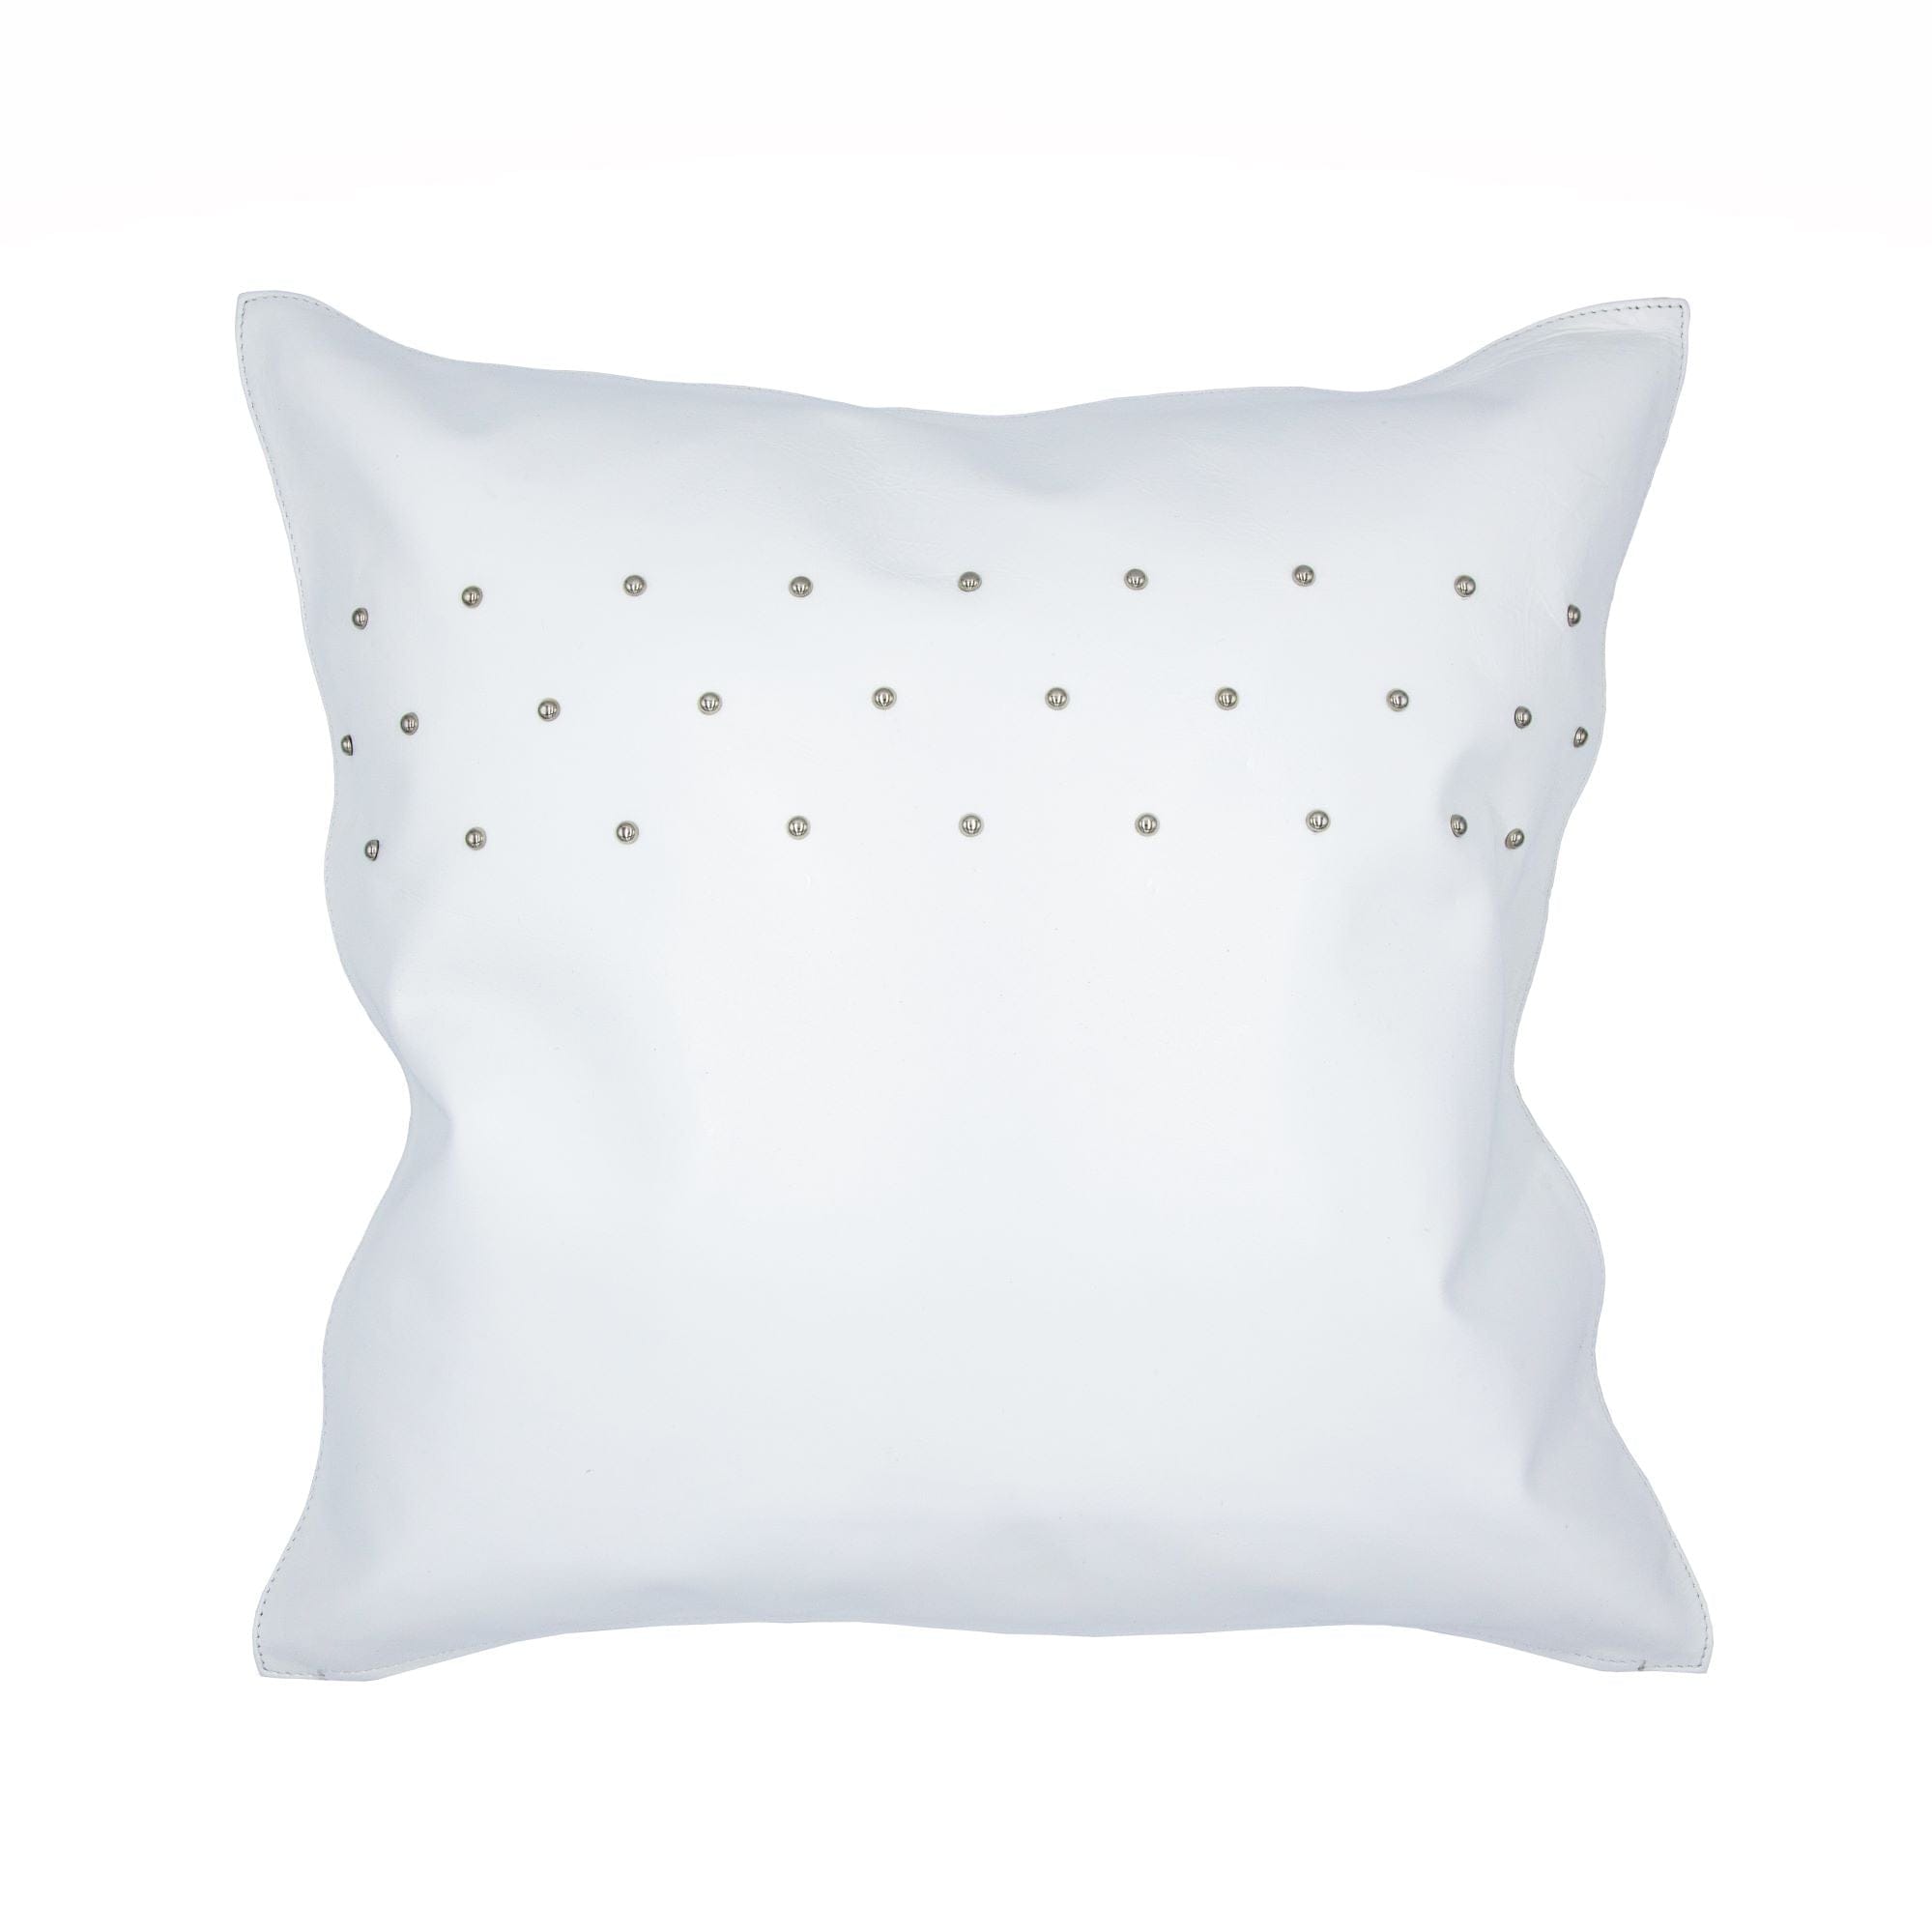 http://www.hiendaccents.com/cdn/shop/products/hiend-accents-leather-pillow-white-genuine-leather-studded-throw-pillow-20x20-pl5012-16316462399591.jpg?v=1662629742